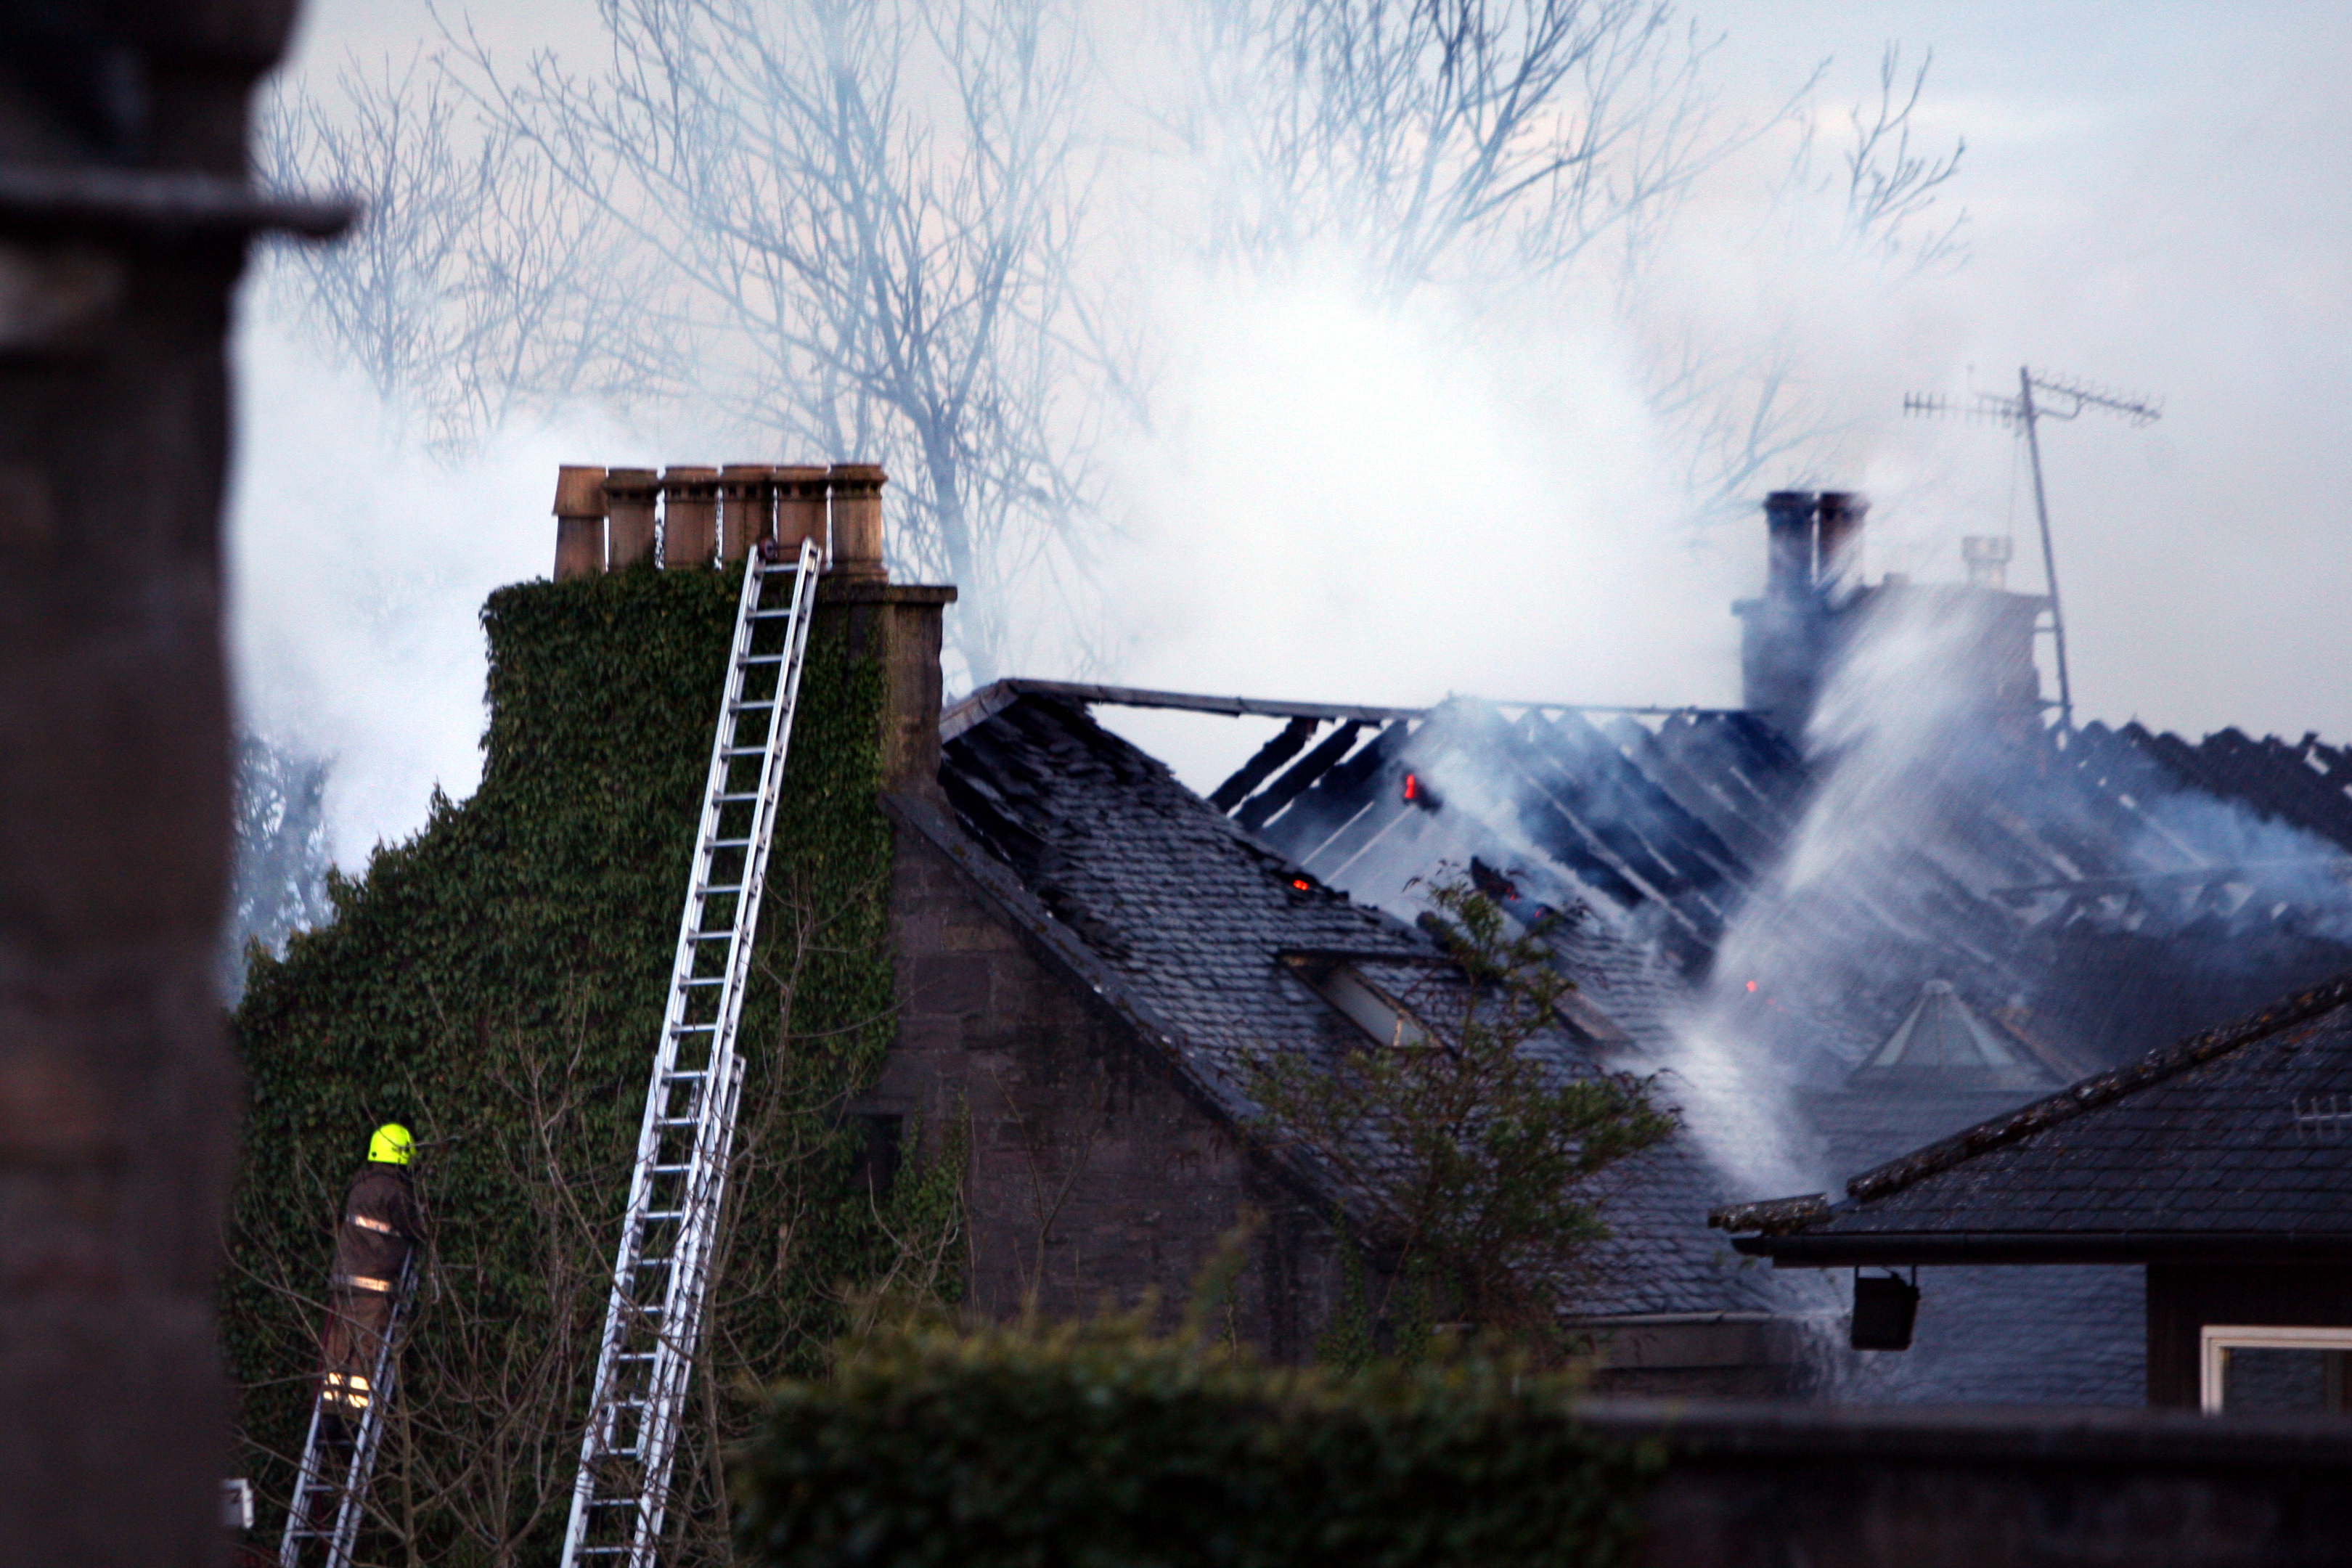 The building's roof was badly damaged